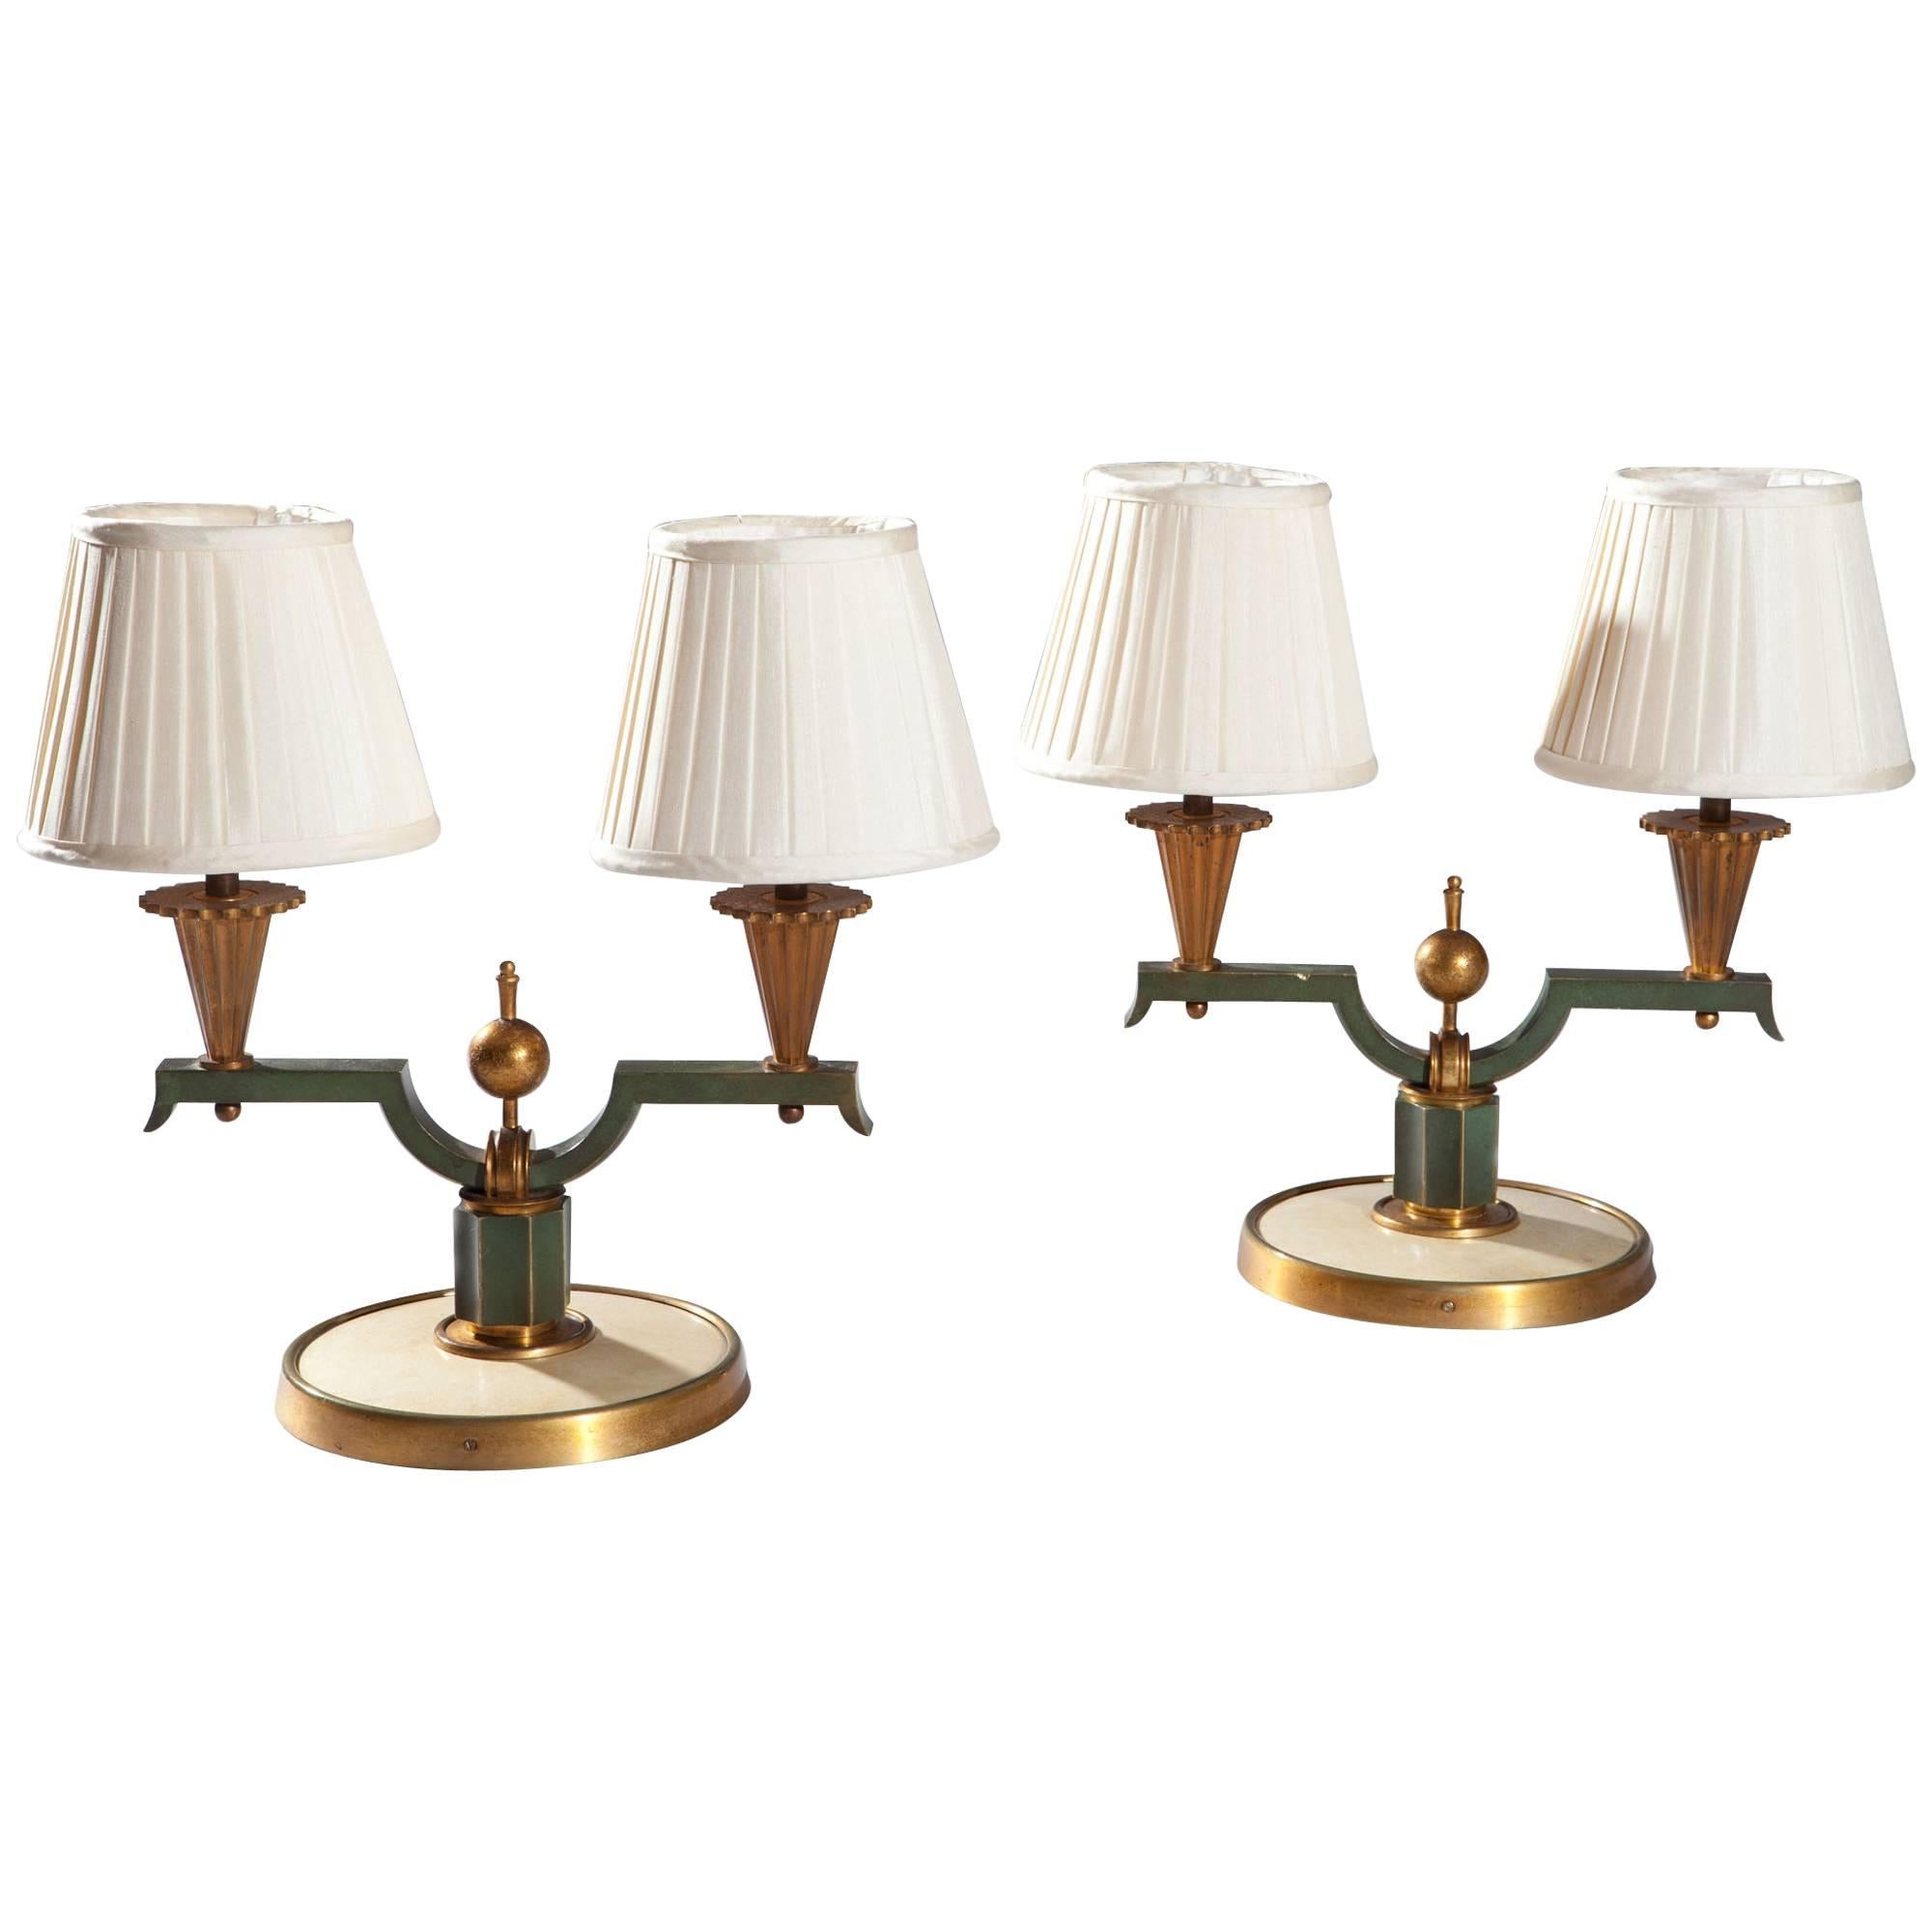 Pair of Art Deco French Patinated and Gilded Bronze Table Lamps Genet et Michon